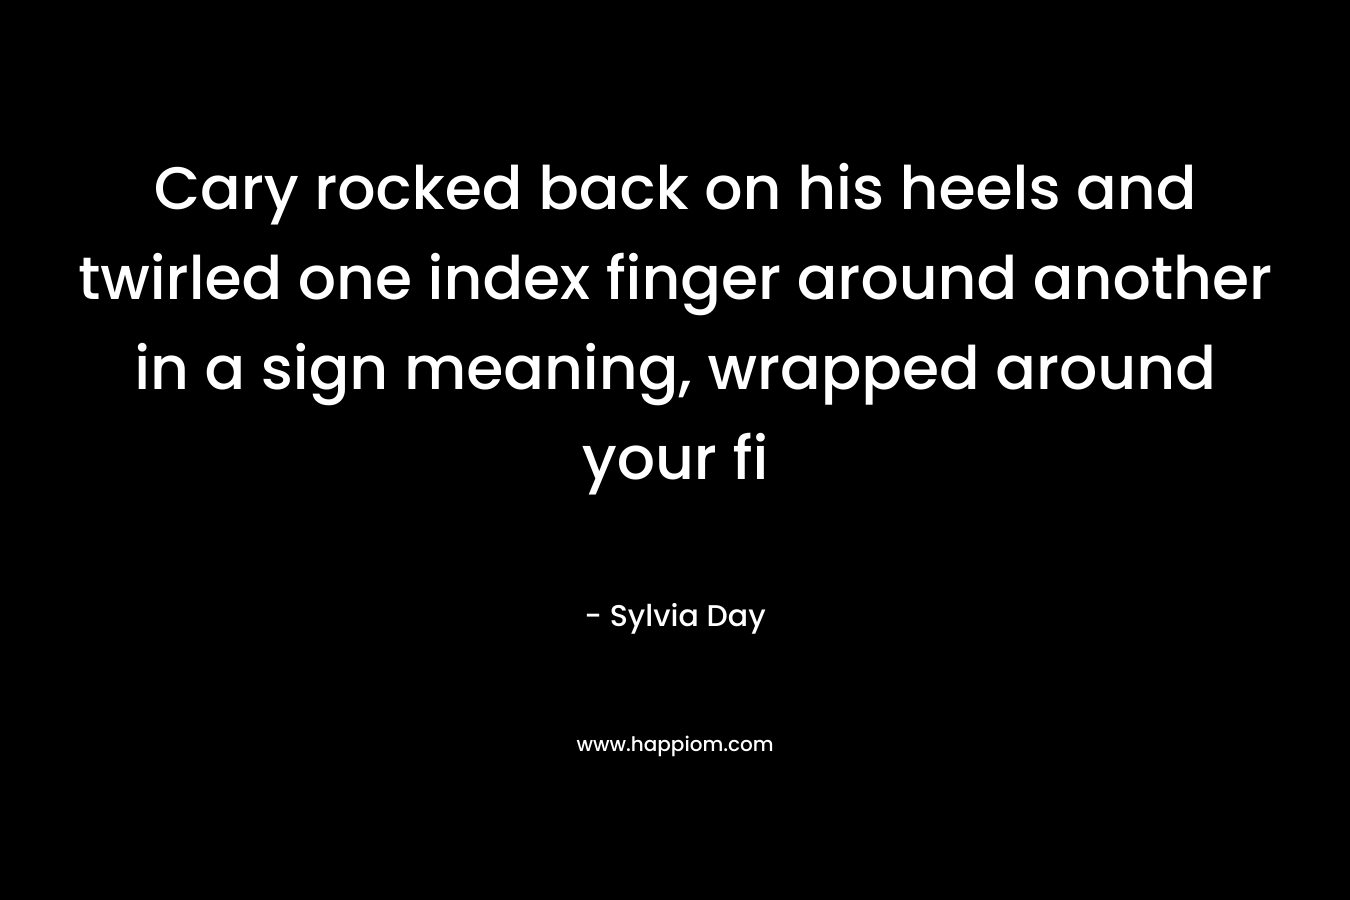 Cary rocked back on his heels and twirled one index finger around another in a sign meaning, wrapped around your fi – Sylvia Day